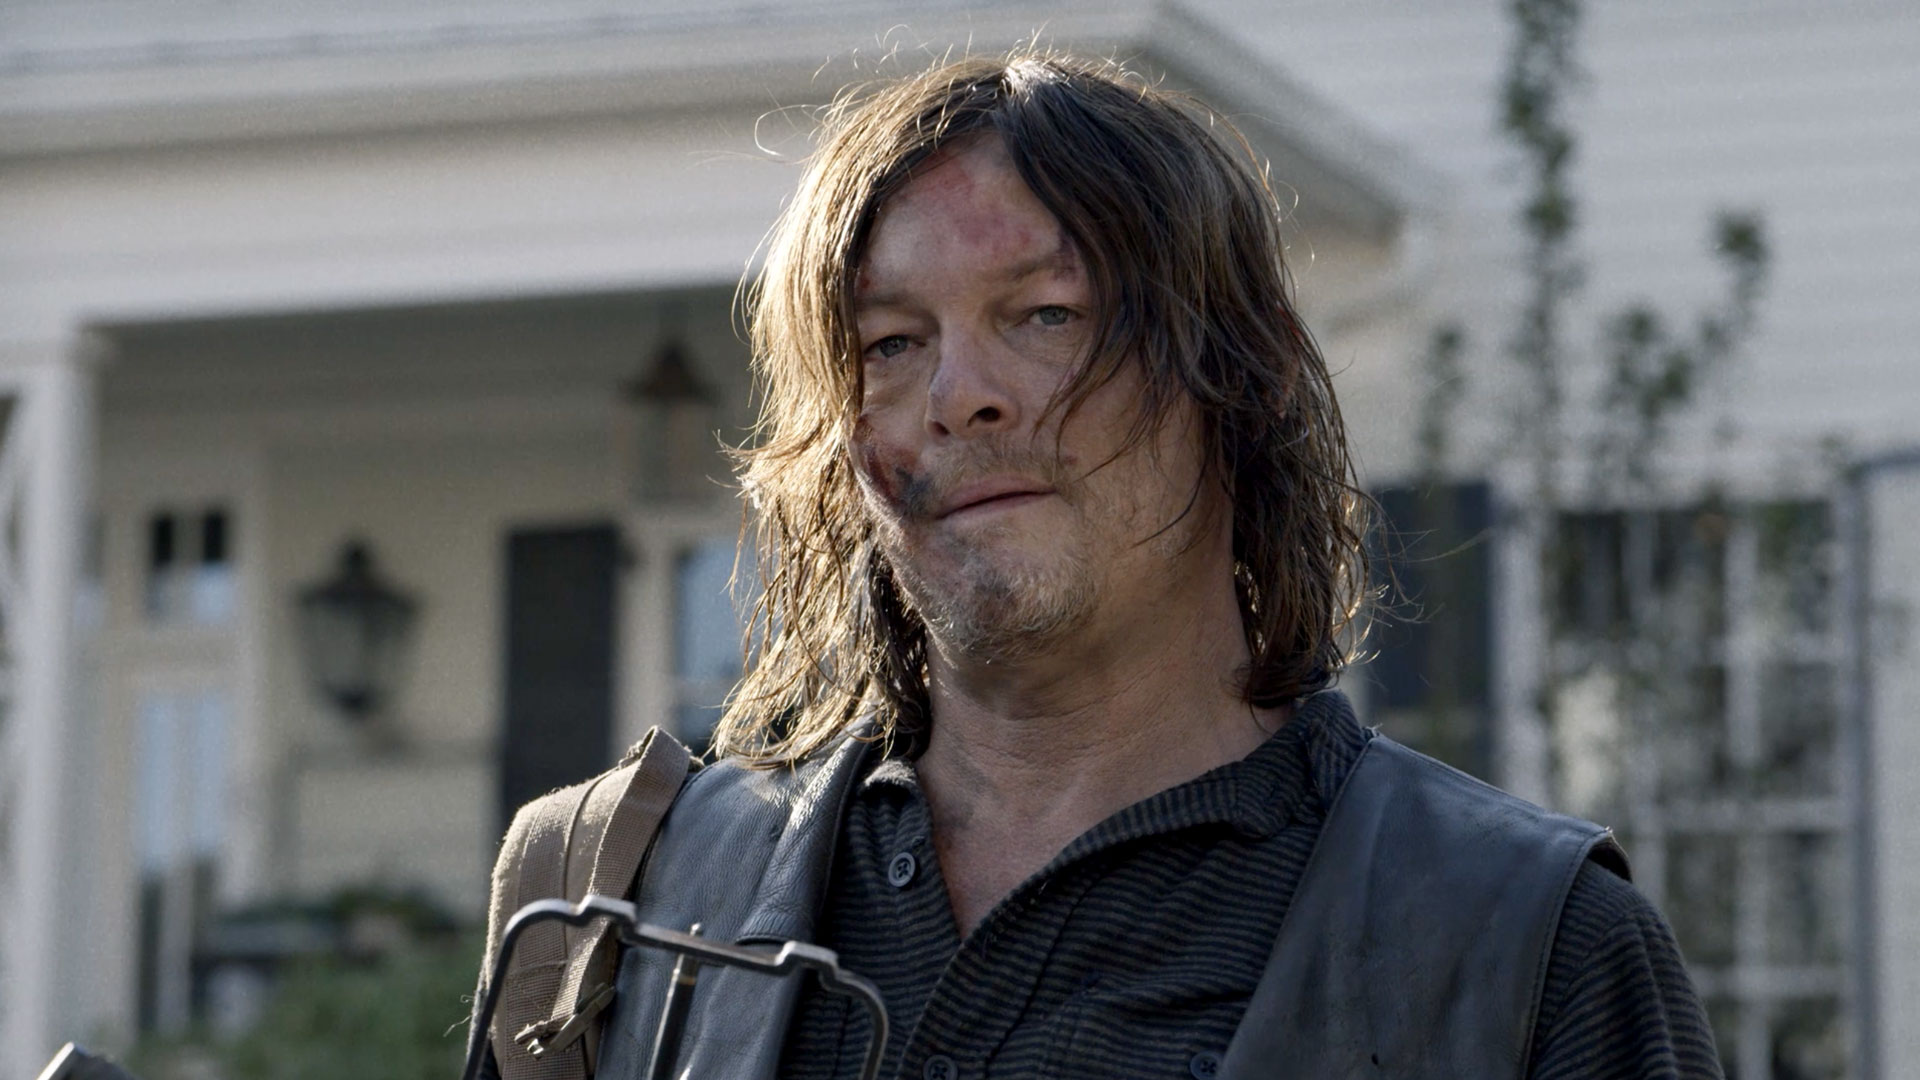 Watch (SPOILERS) Inside the Walking Dead Season 10: Cast and Creators on Daryl and Carol's Separate Journeys | The Walking Dead Video Extras